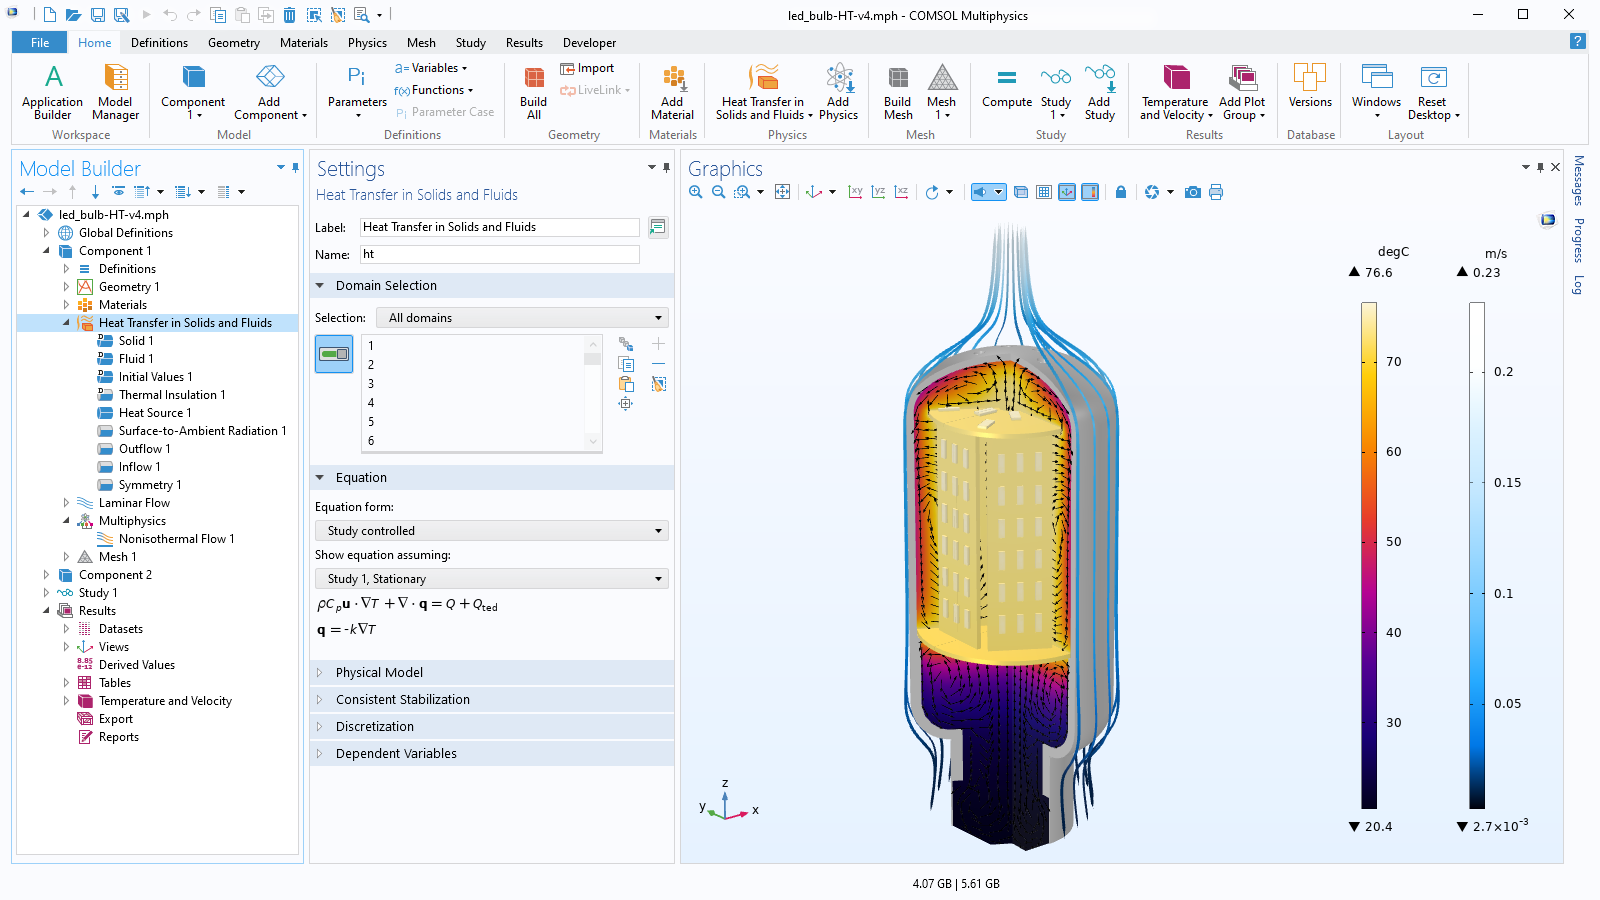 The COMSOL Multiphysics UI showing the Model Builder with the Heat Transfer in Solids and Fluids node highlighted, the corresponding Settings window, and an LED bulb model in the Graphics window.